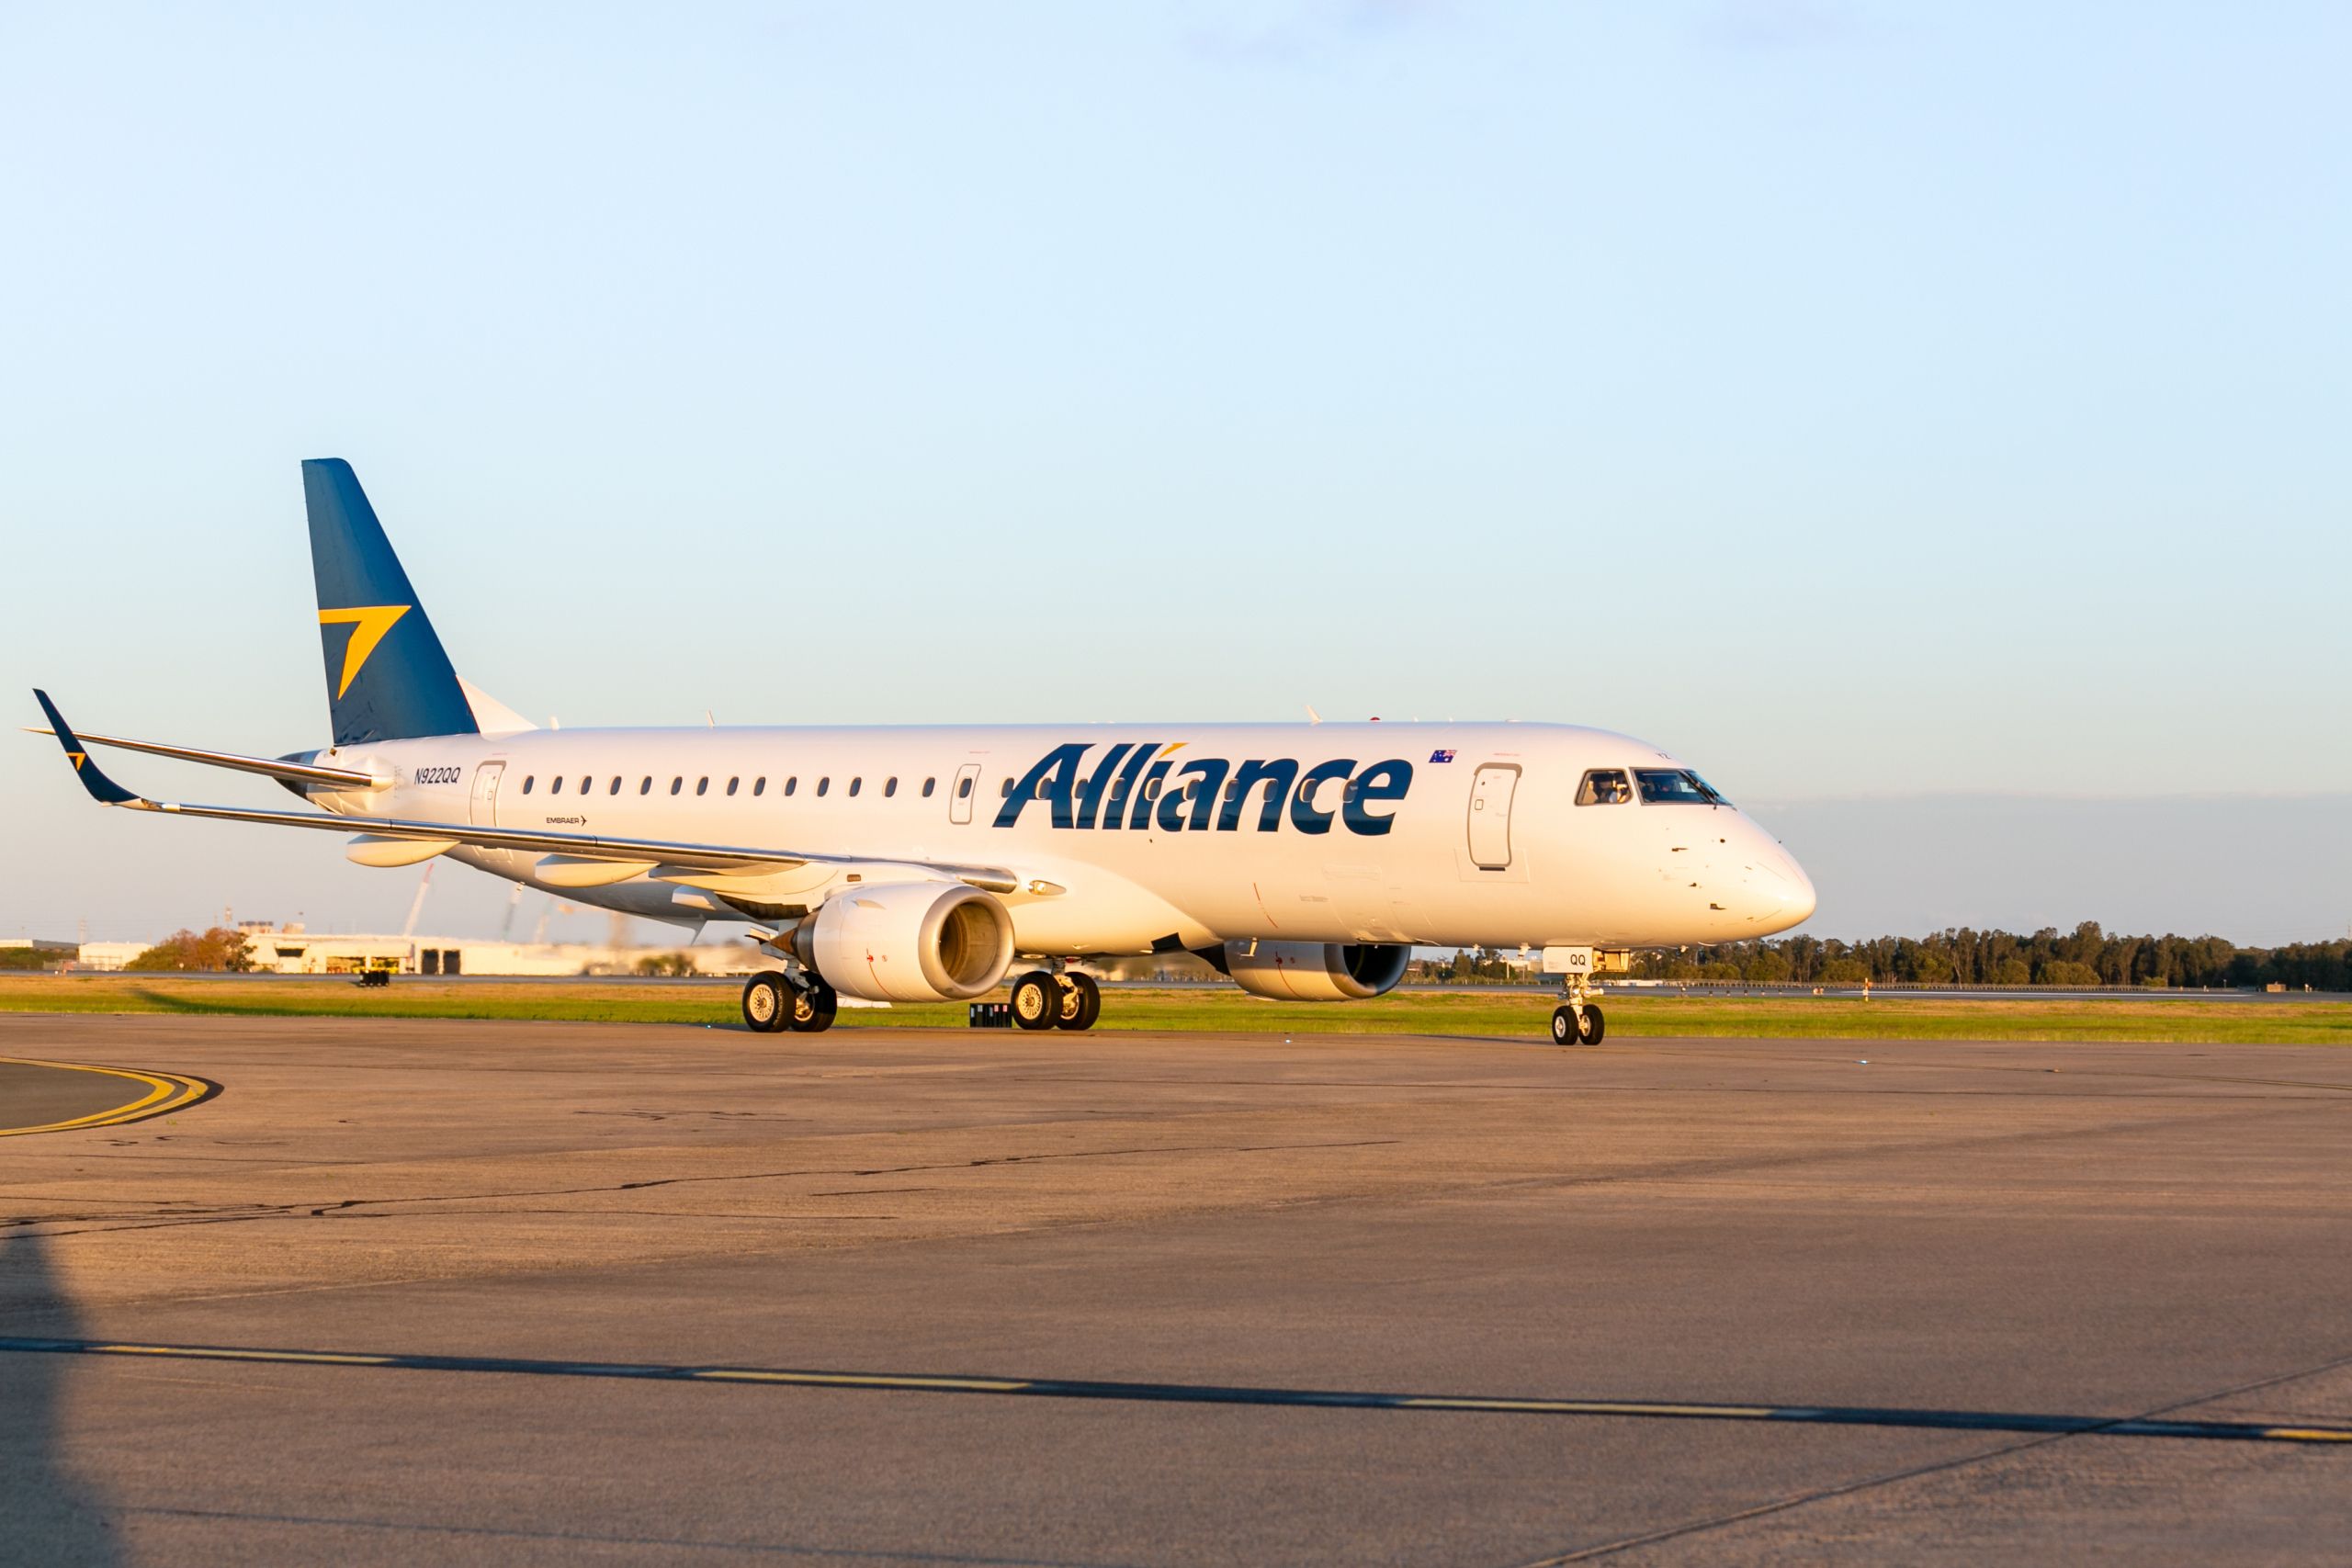 An Alliance Airline Embraer E190